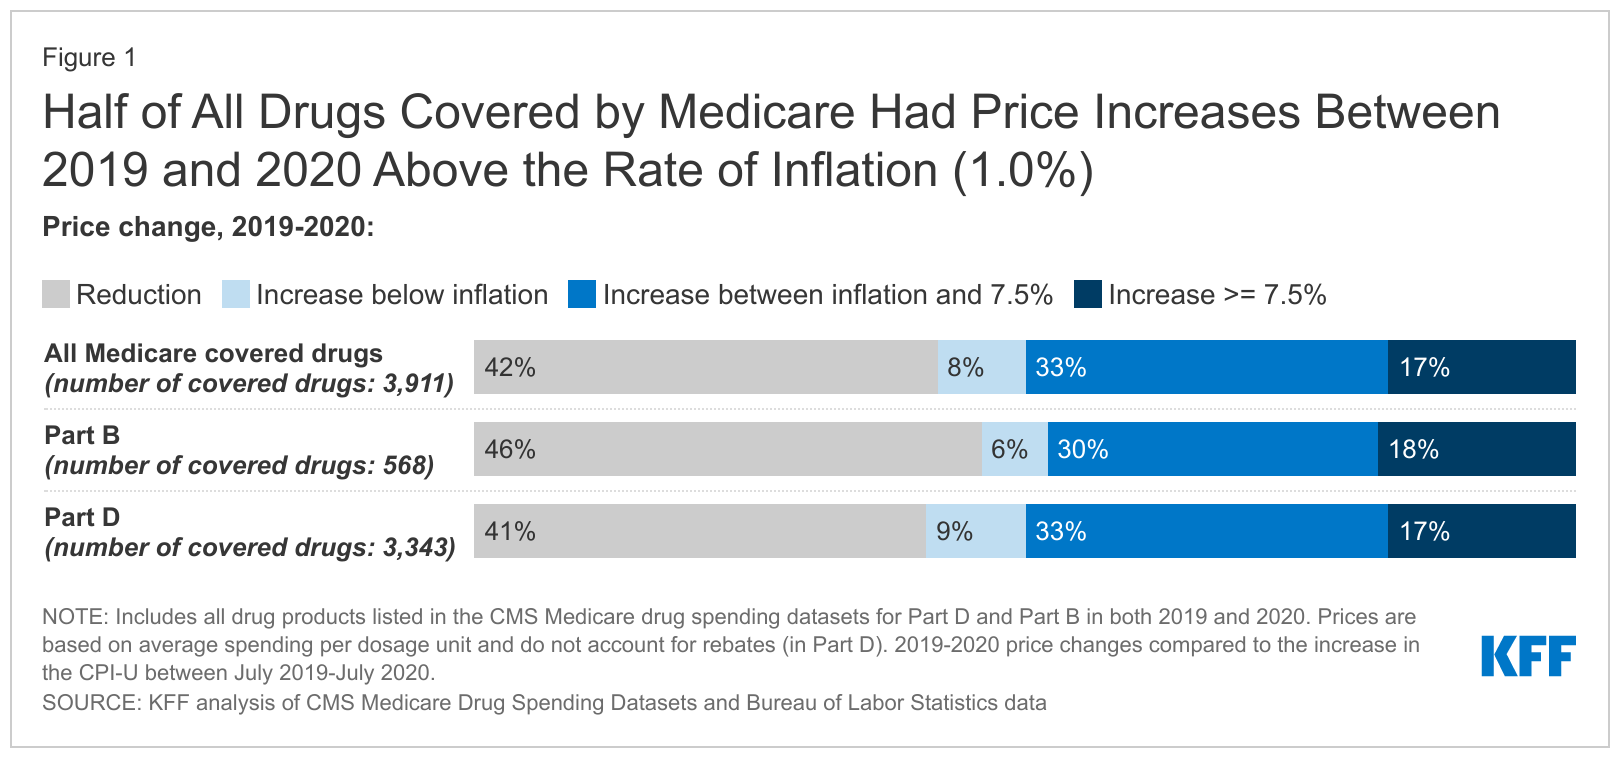 prices-increased-faster-than-inflation-for-half-of-all-drugs-covered-by